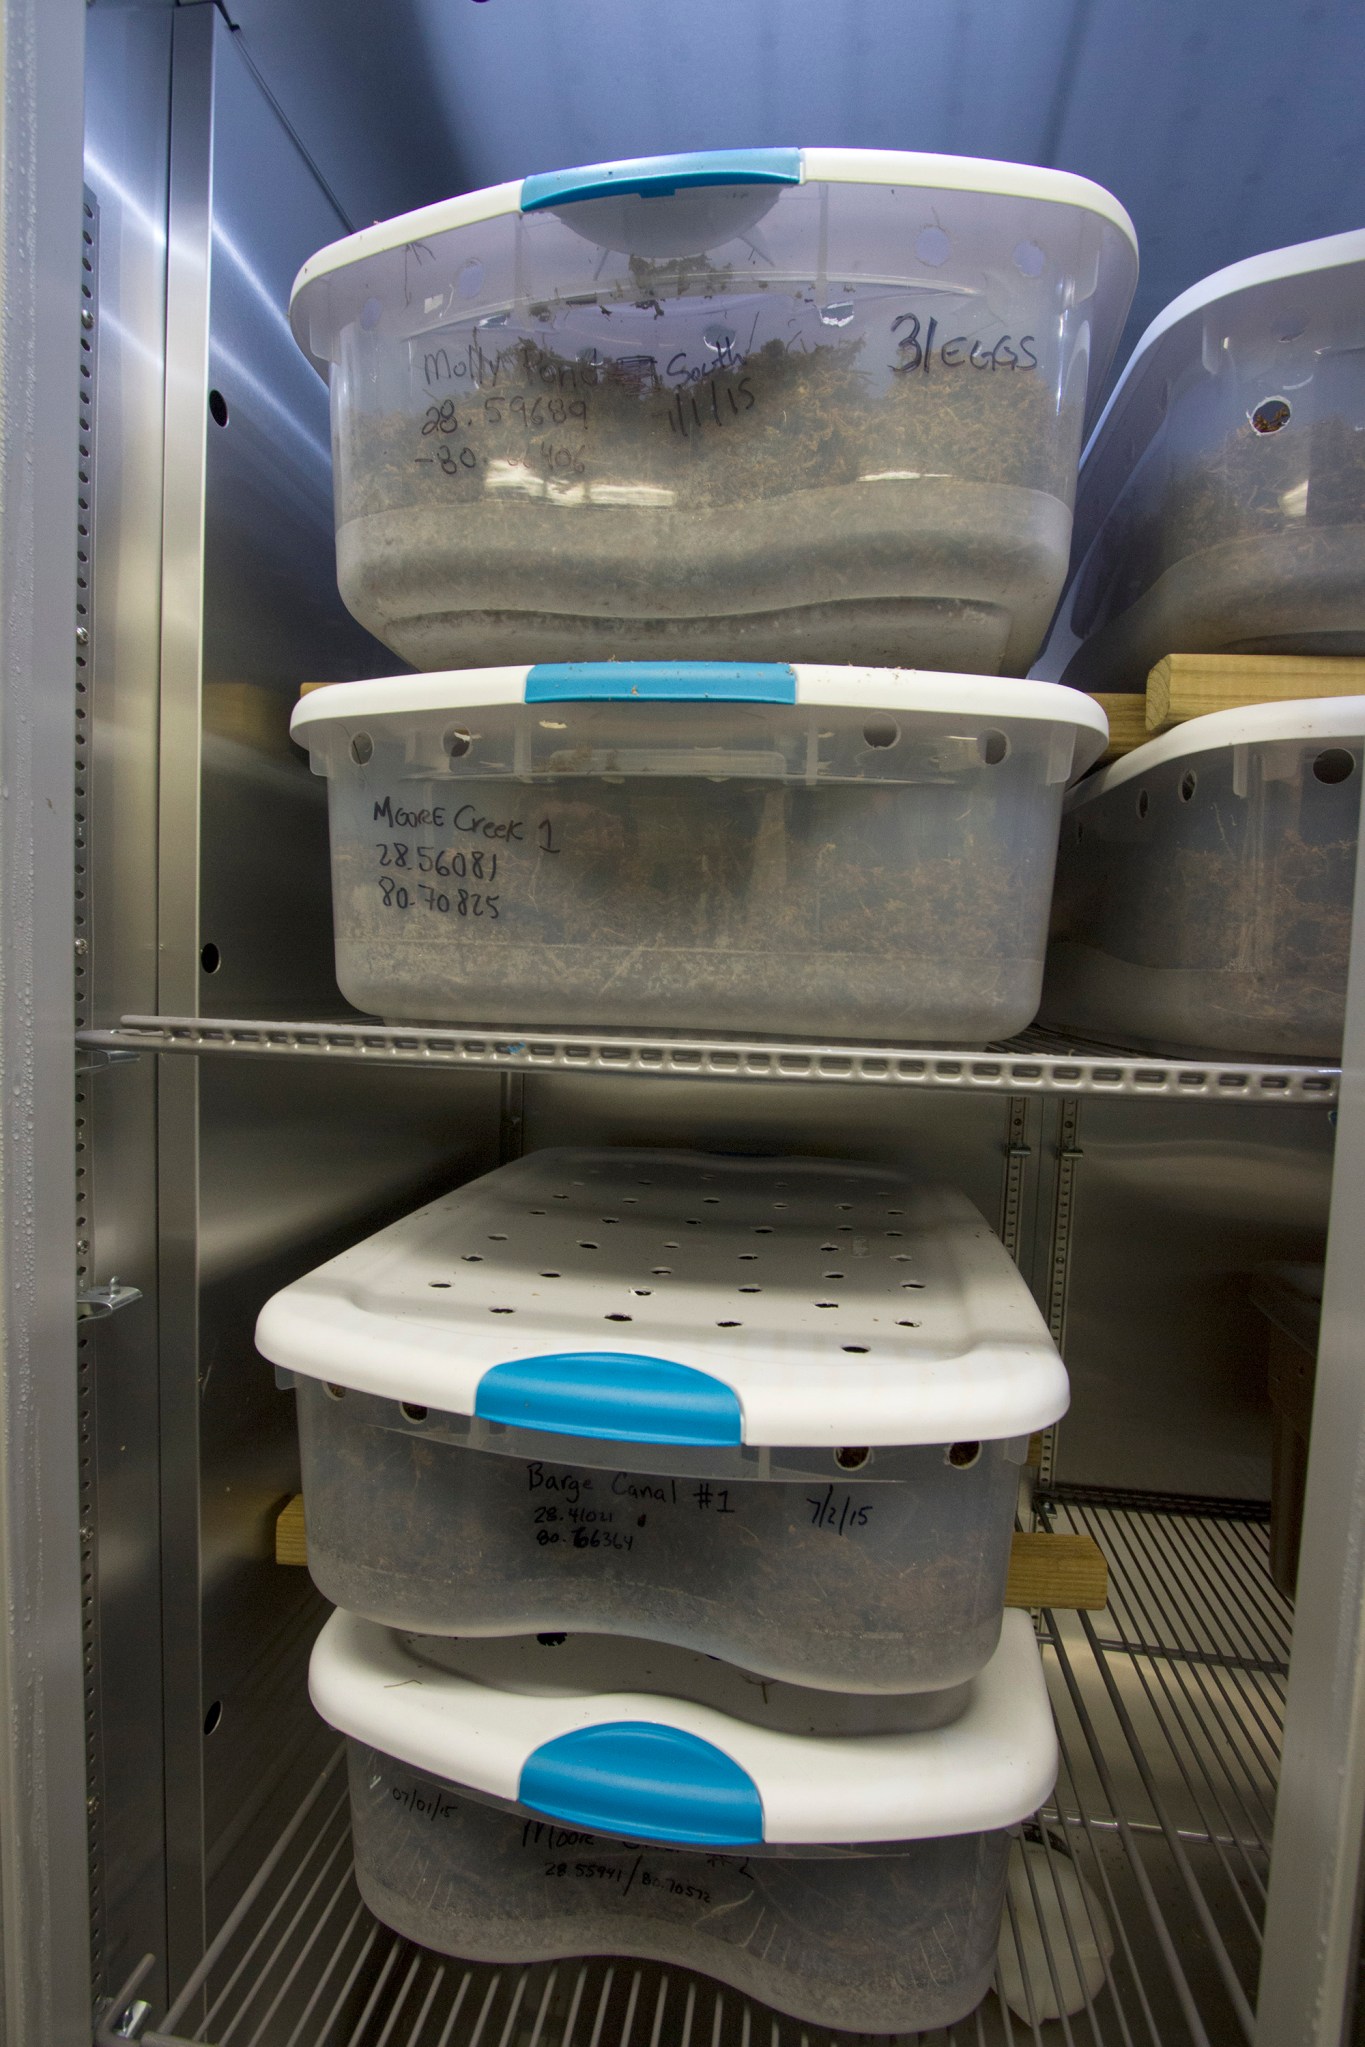 Plastic bins filled with alligator eggs in a bed of sphagnum moss are stacked inside the incubator.